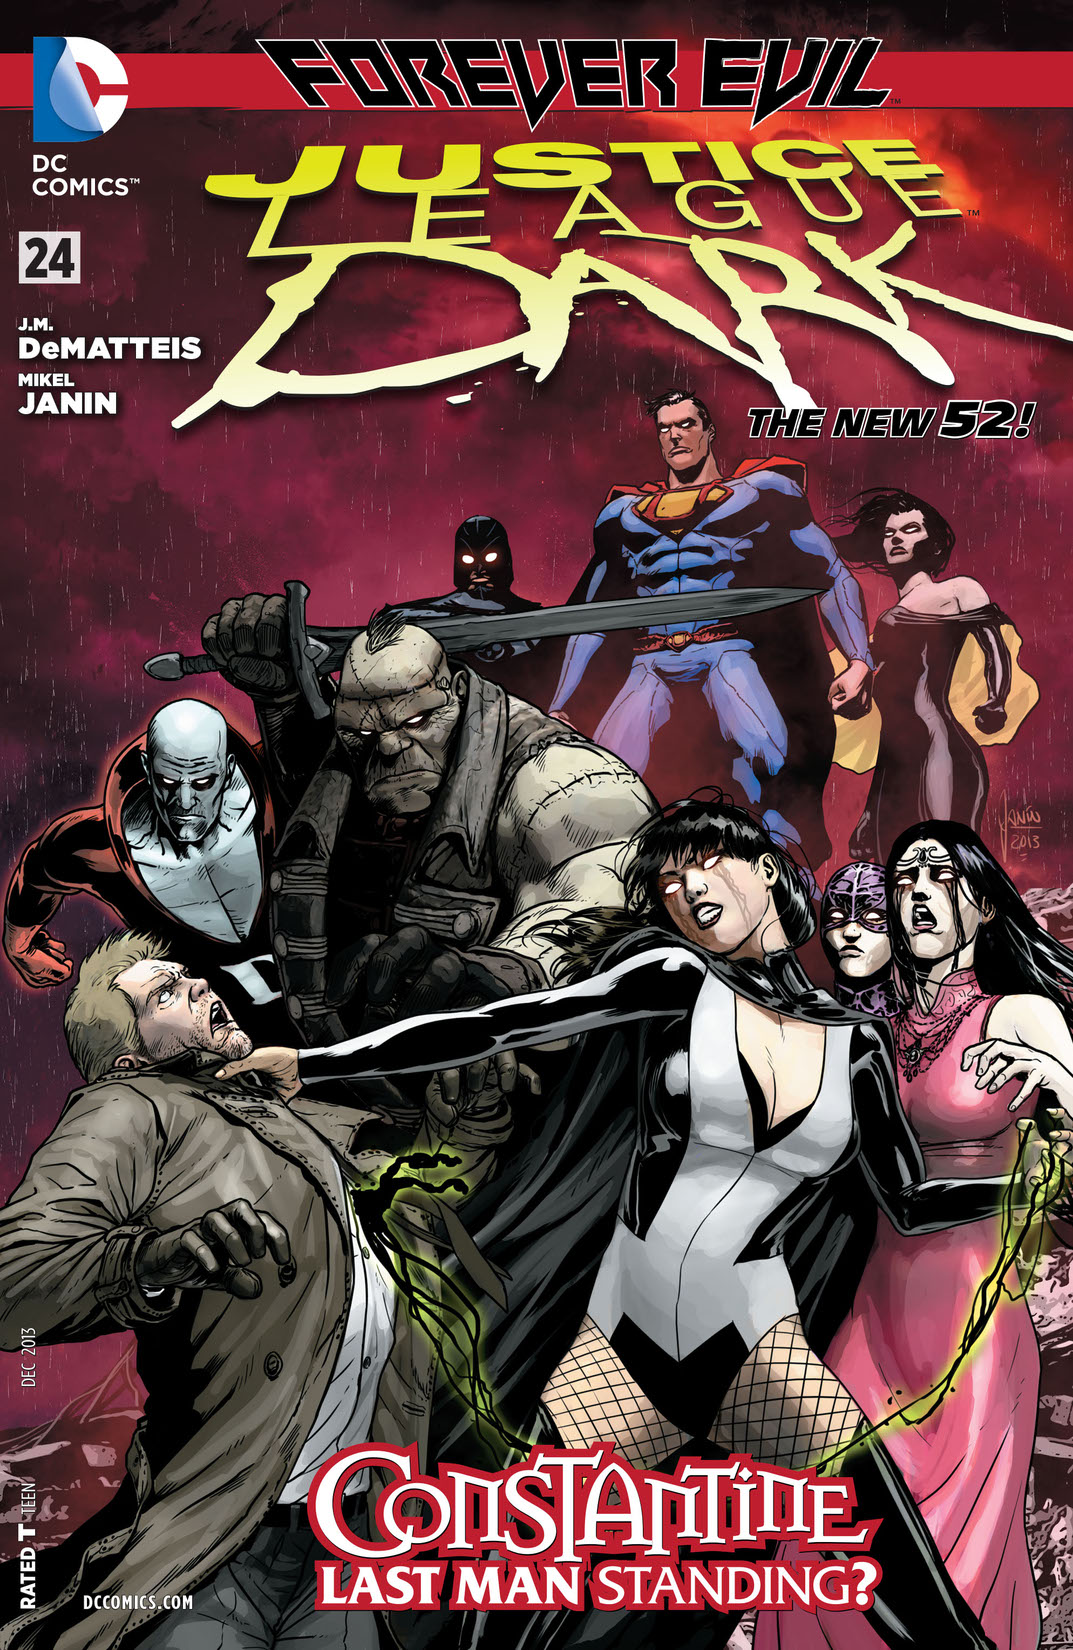 Justice League Dark (2011-) #24 preview images